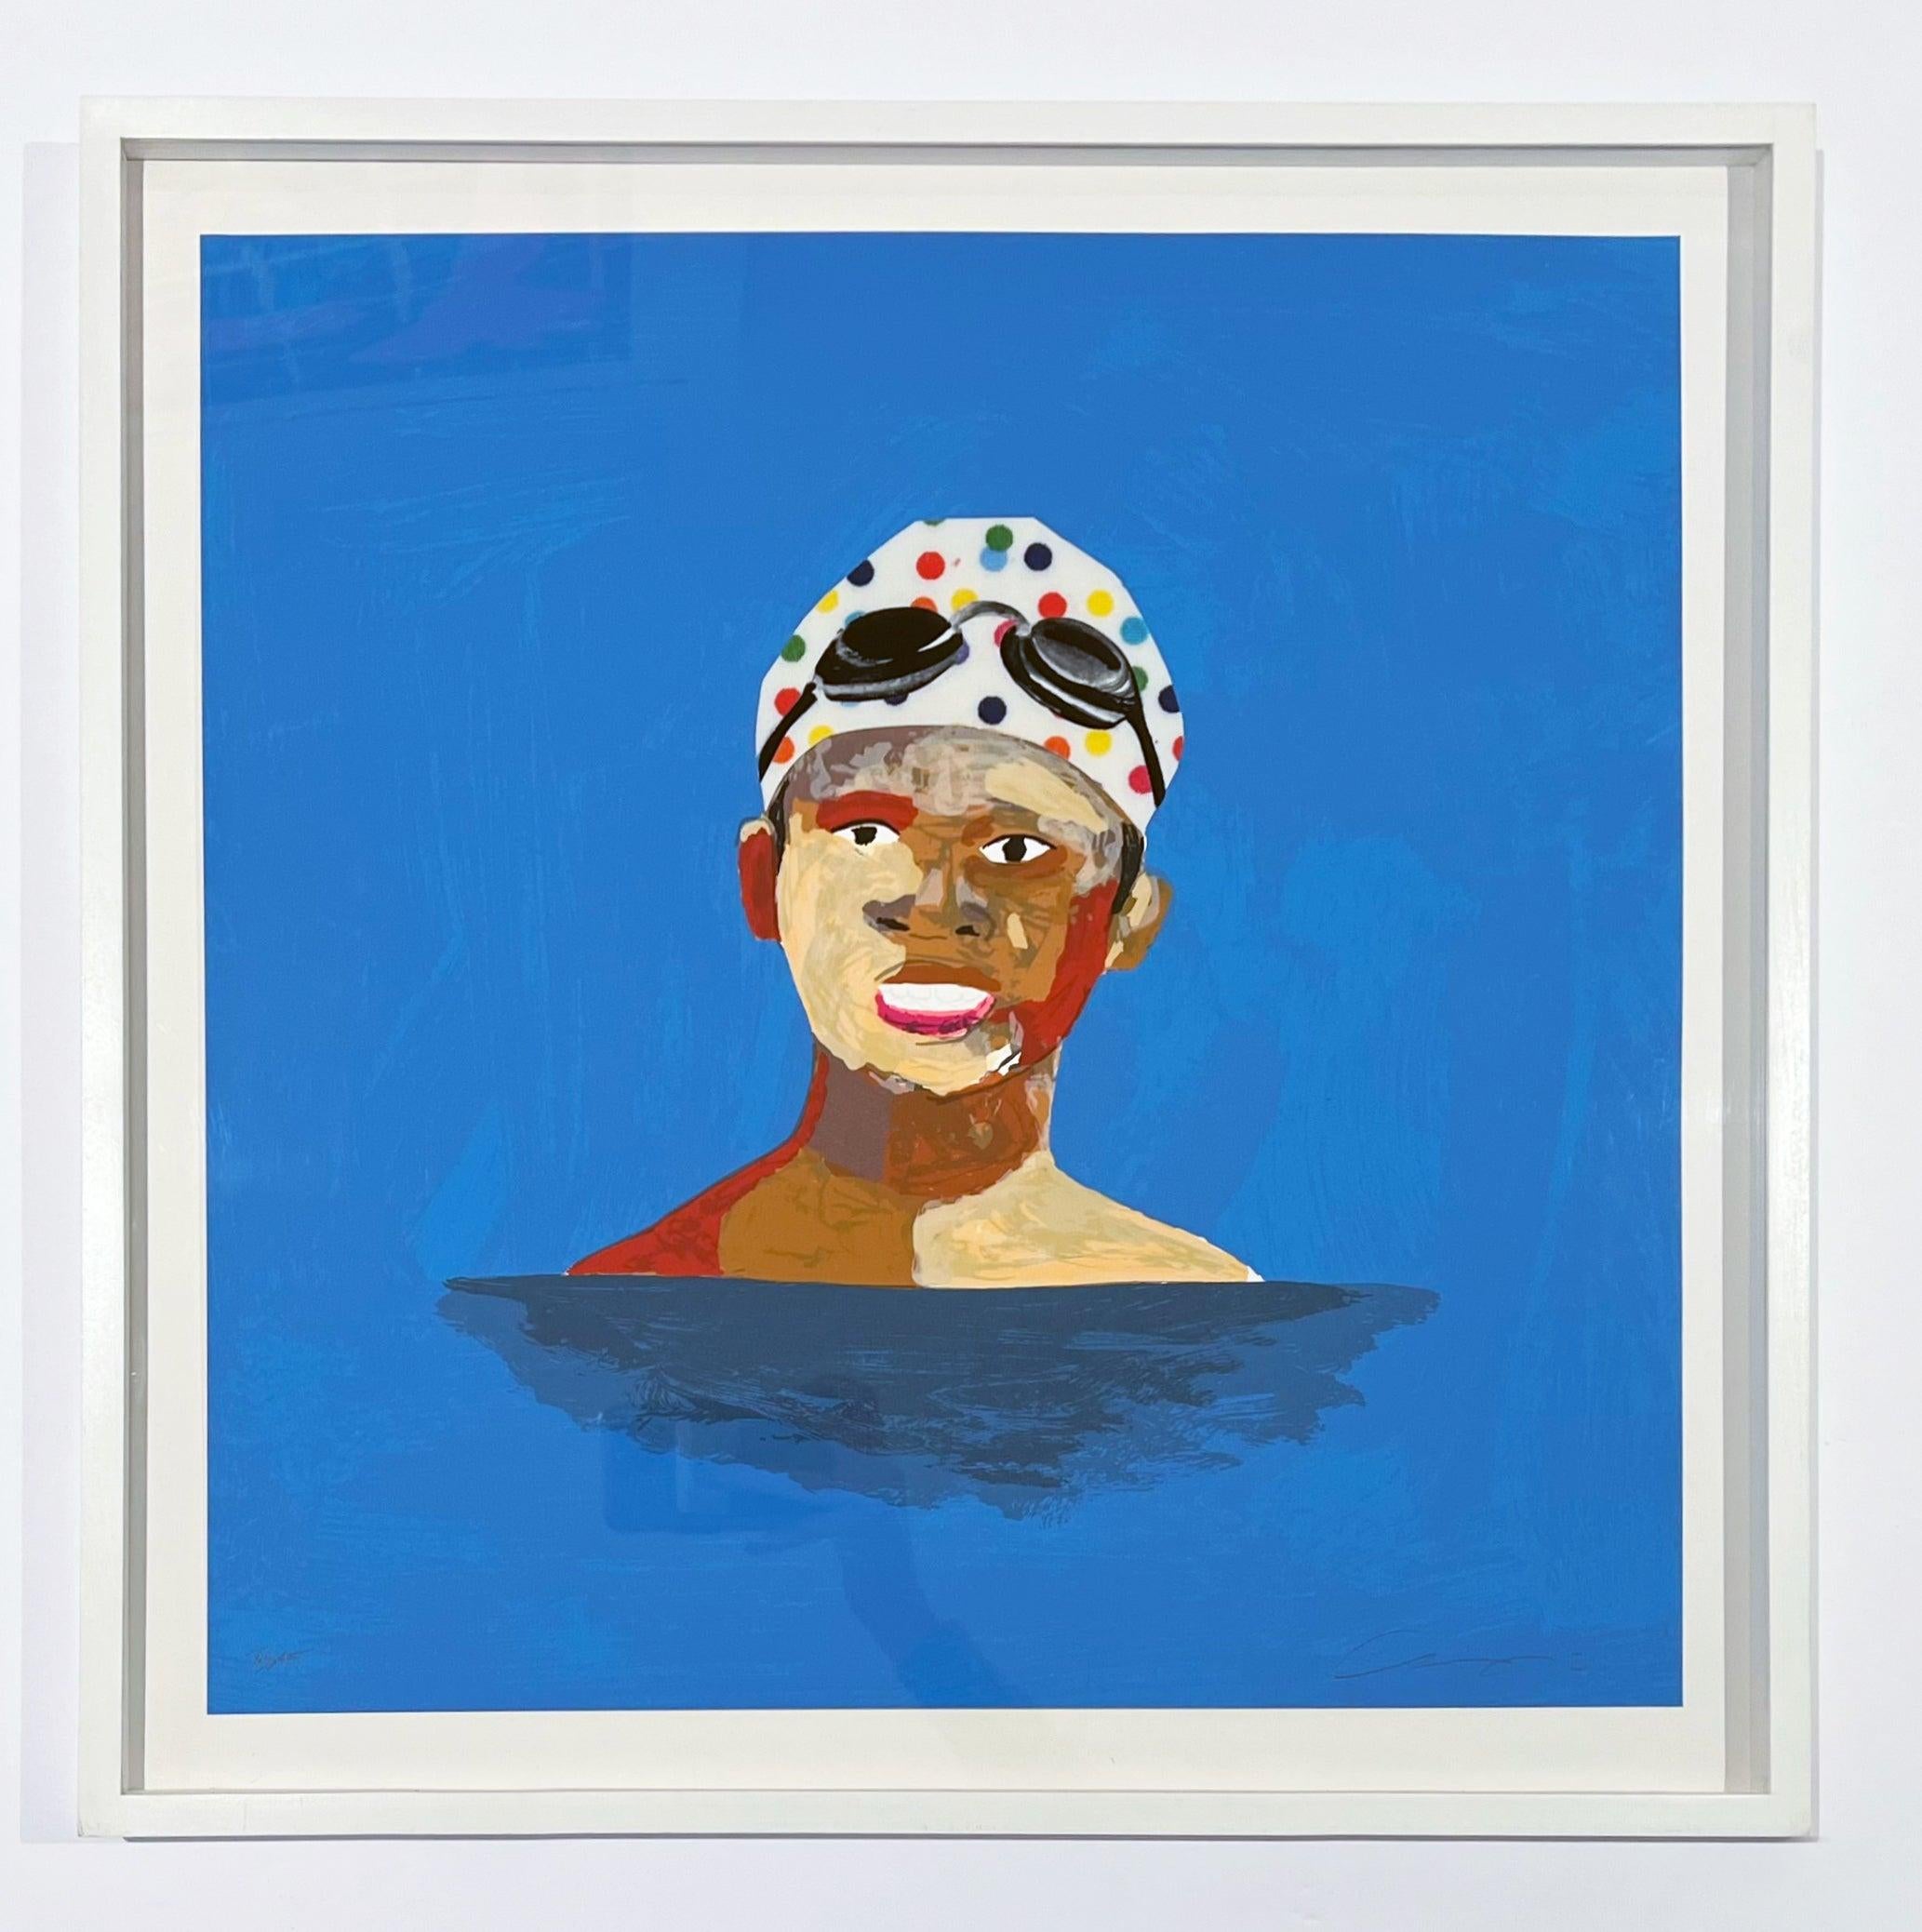 Artist: Derrick Adams
Title: How I Spent My Summer
Medium: Suite of 9 screenprints with collage
Year: 2021
Edition: BAT (the good-to-print proofs, aside from the edition of 20 + 4 AP)
Frame Size: 20 3/4